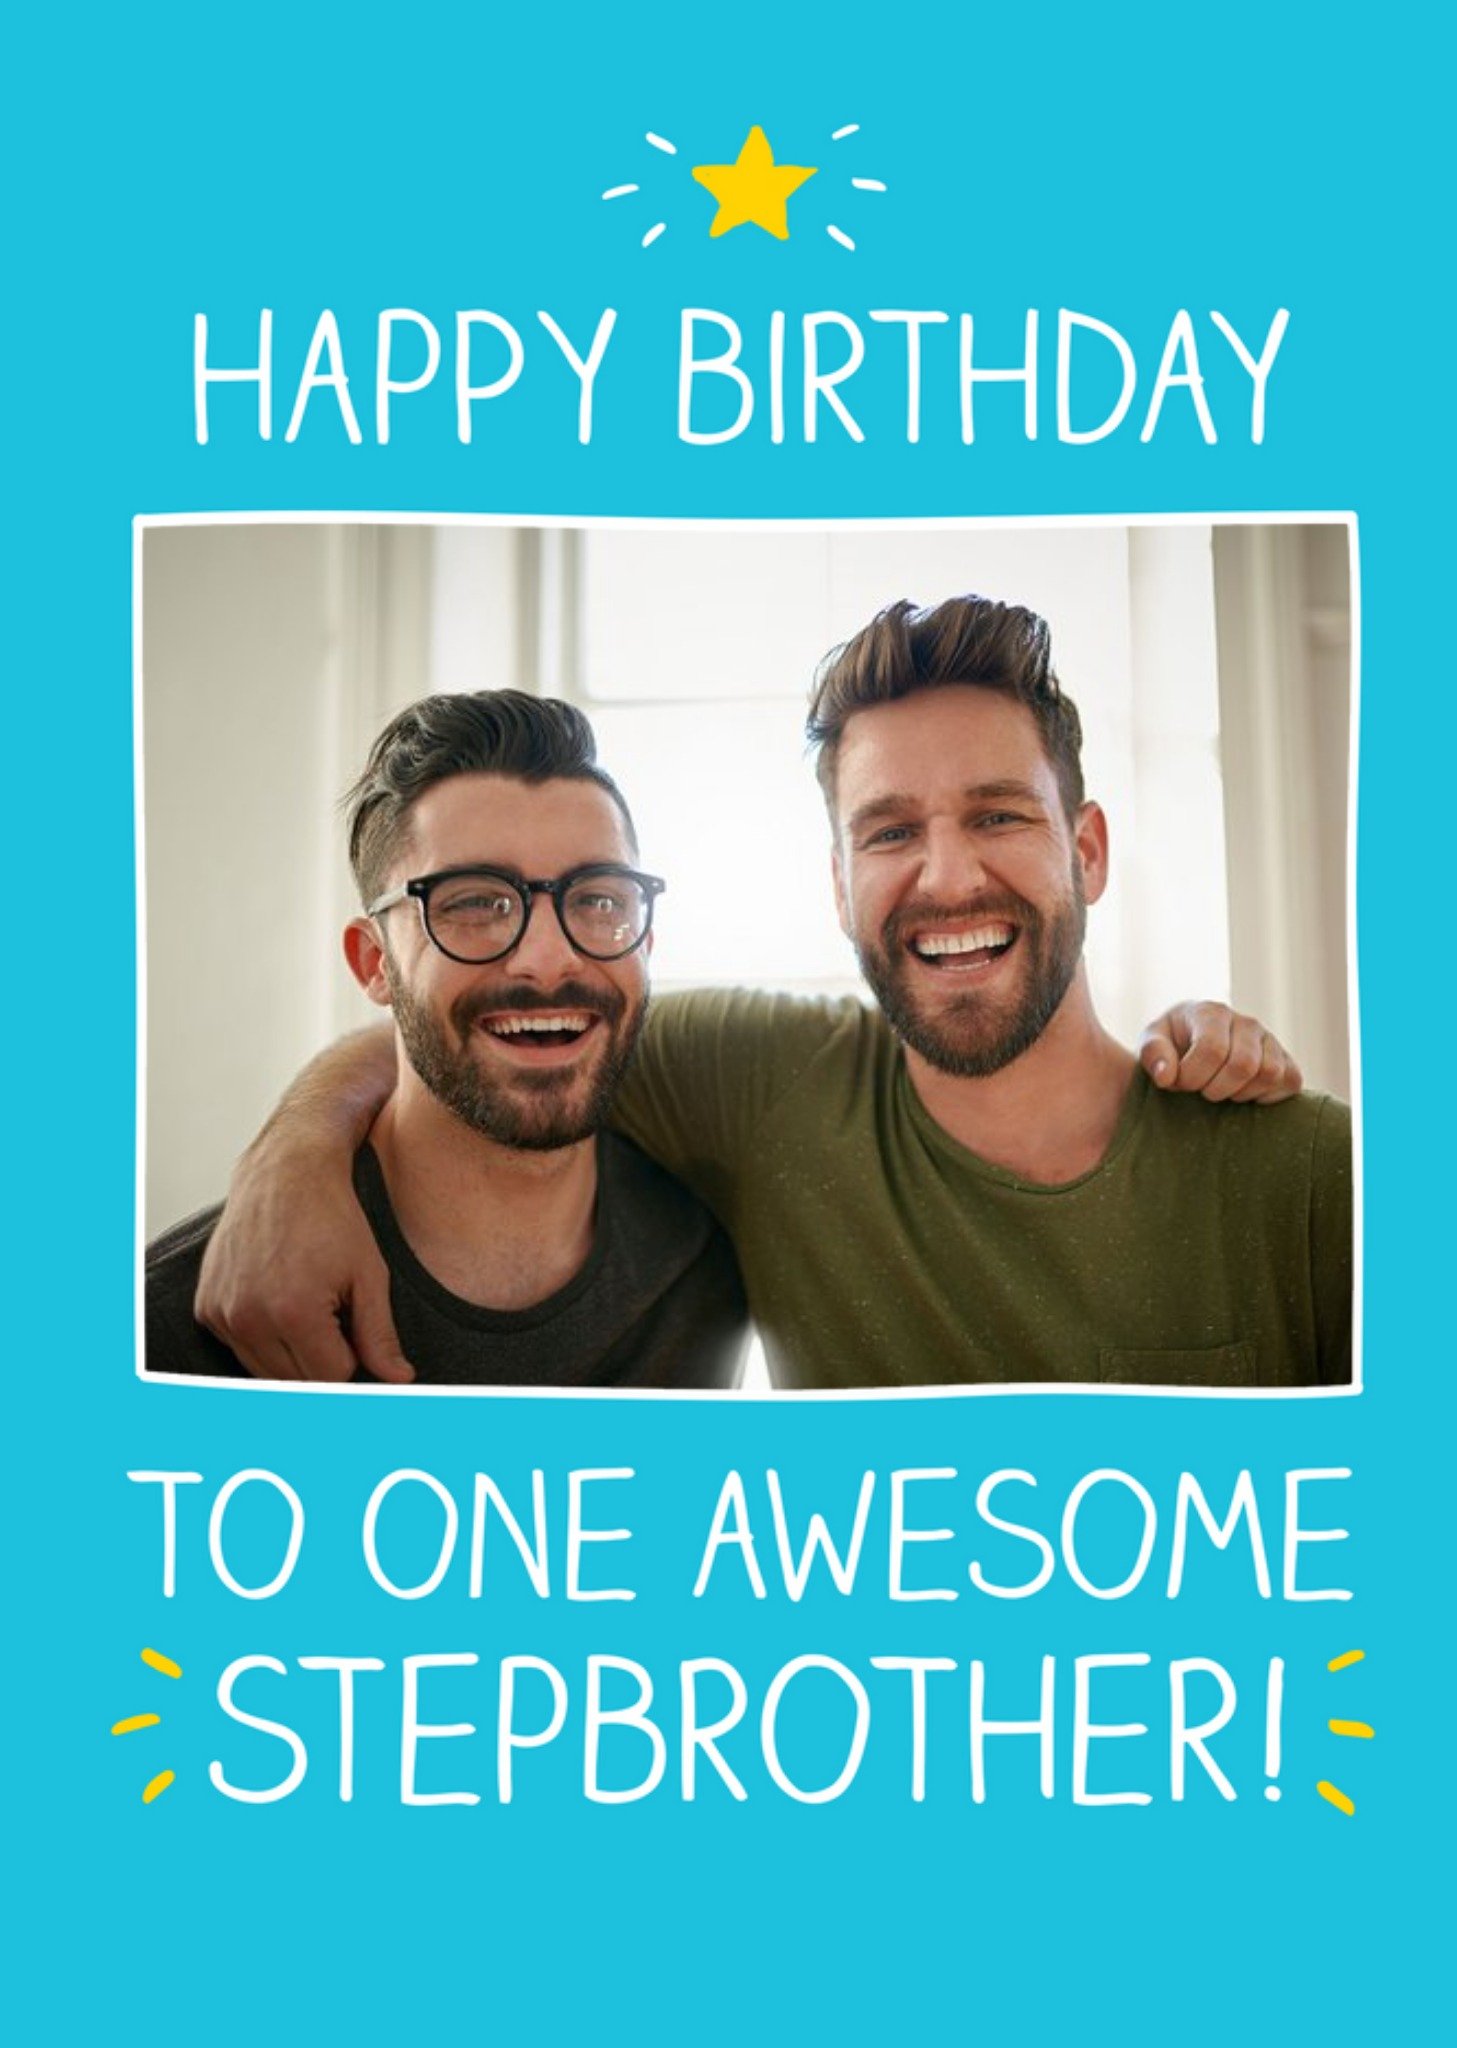 Happy Jackson To One Awesome Stepbrother Personalised Photo Birthday Card, Large